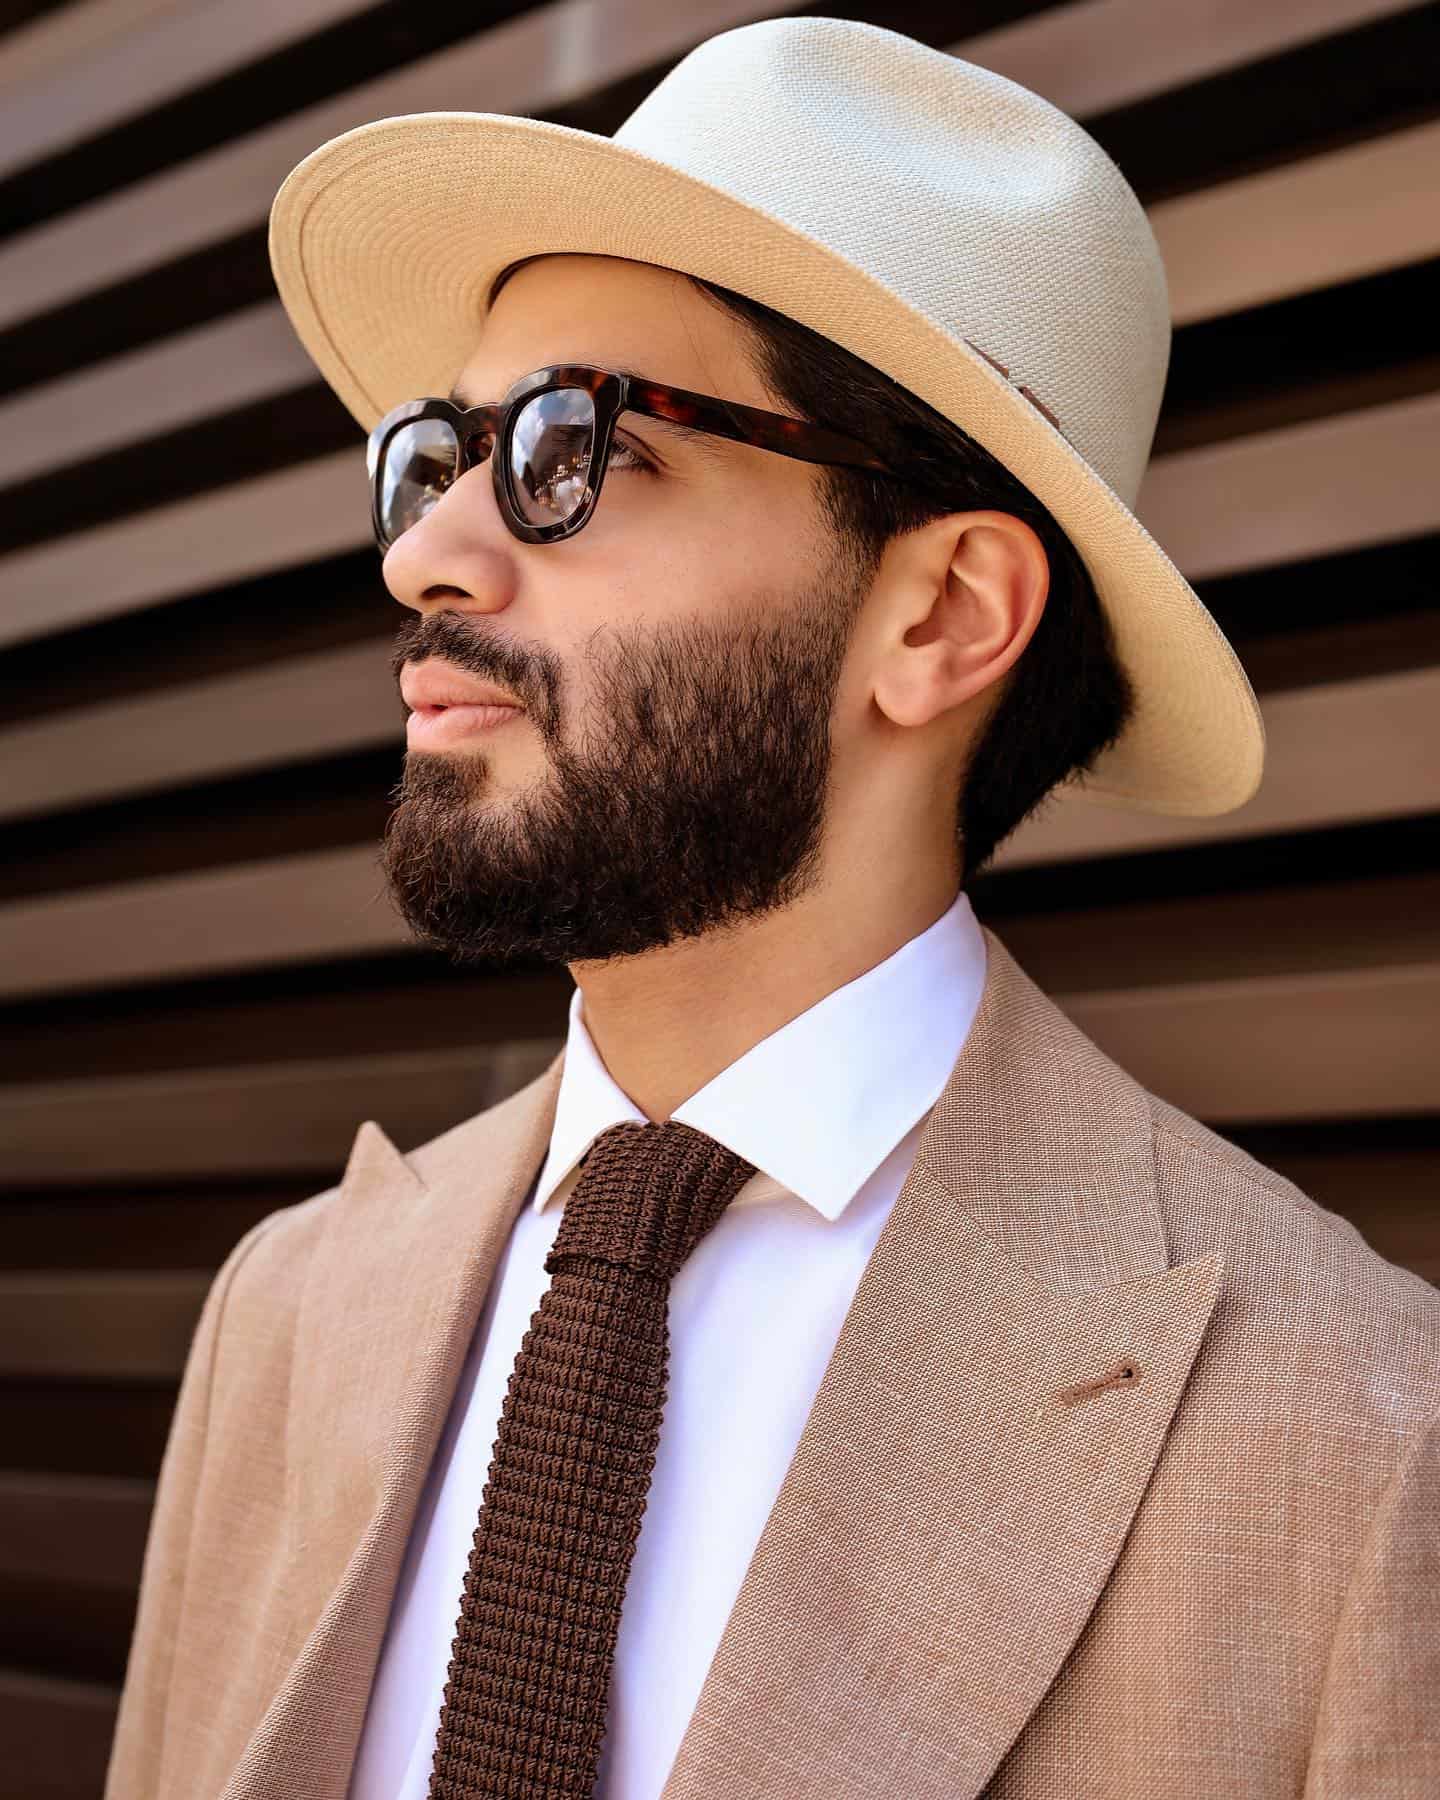 pairing a suit with a straw hat